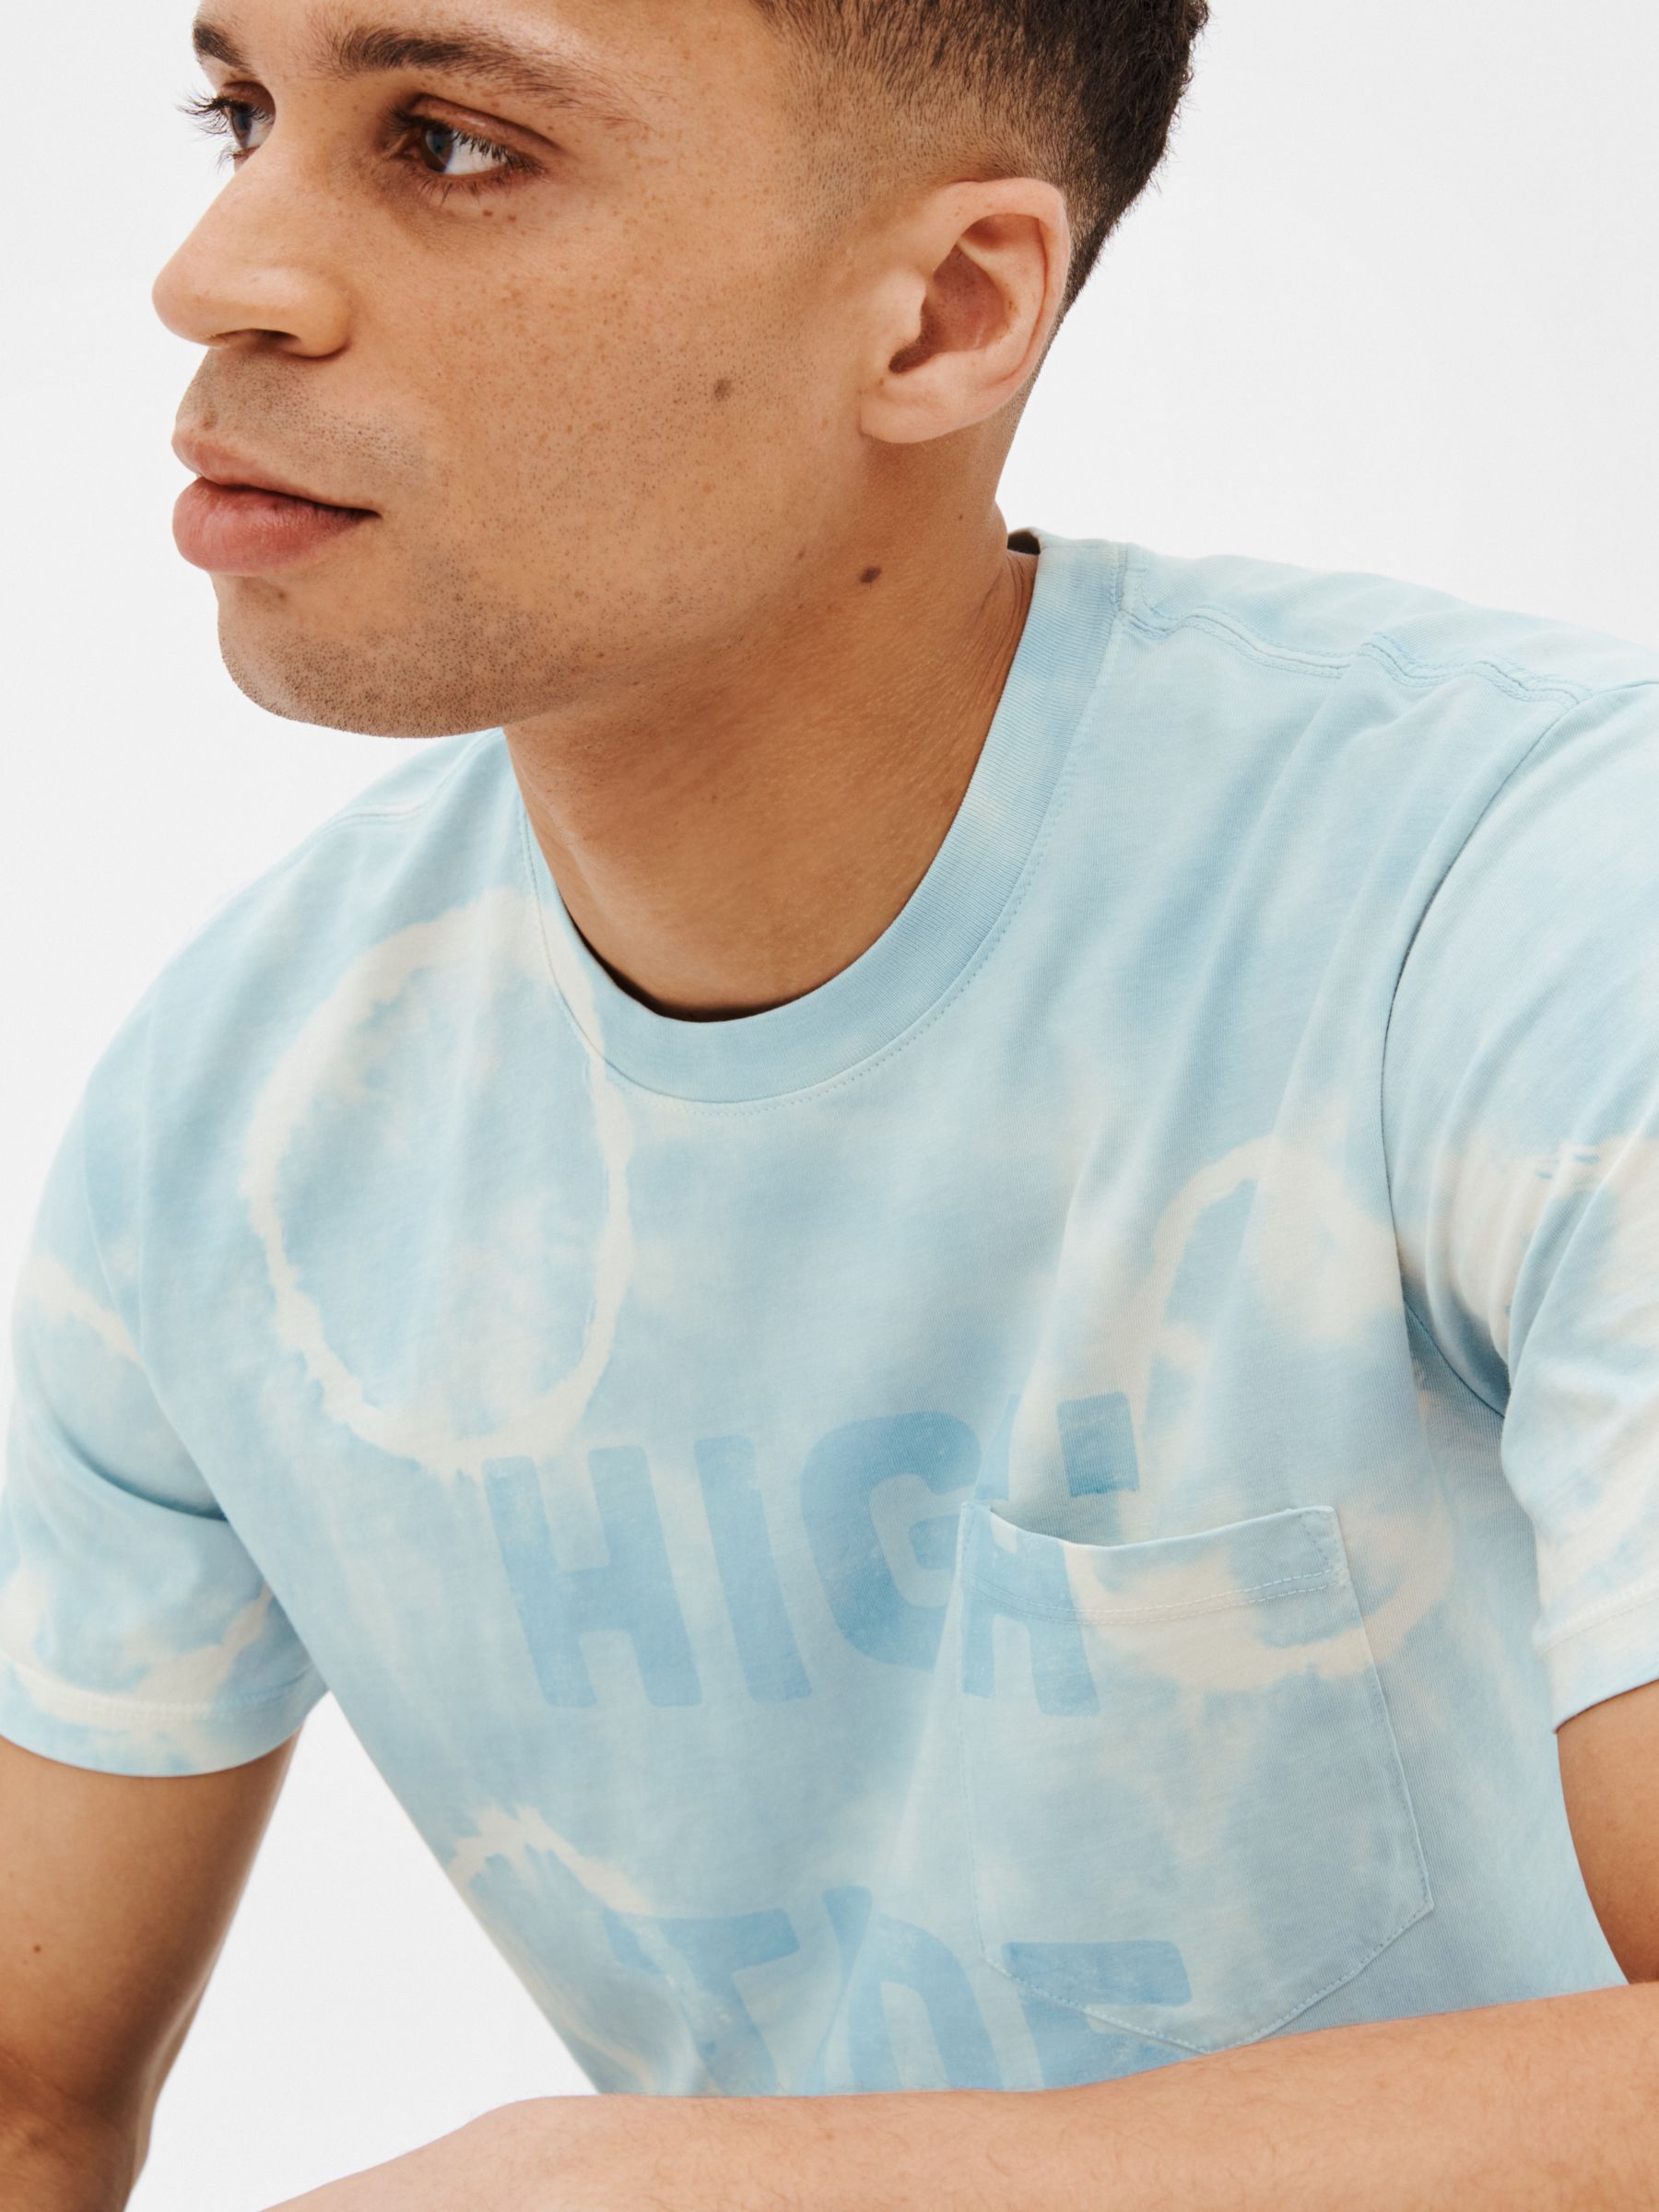 Outerknown Tide Shift Tie Dye T-Shirt, Blue at John Lewis & Partners